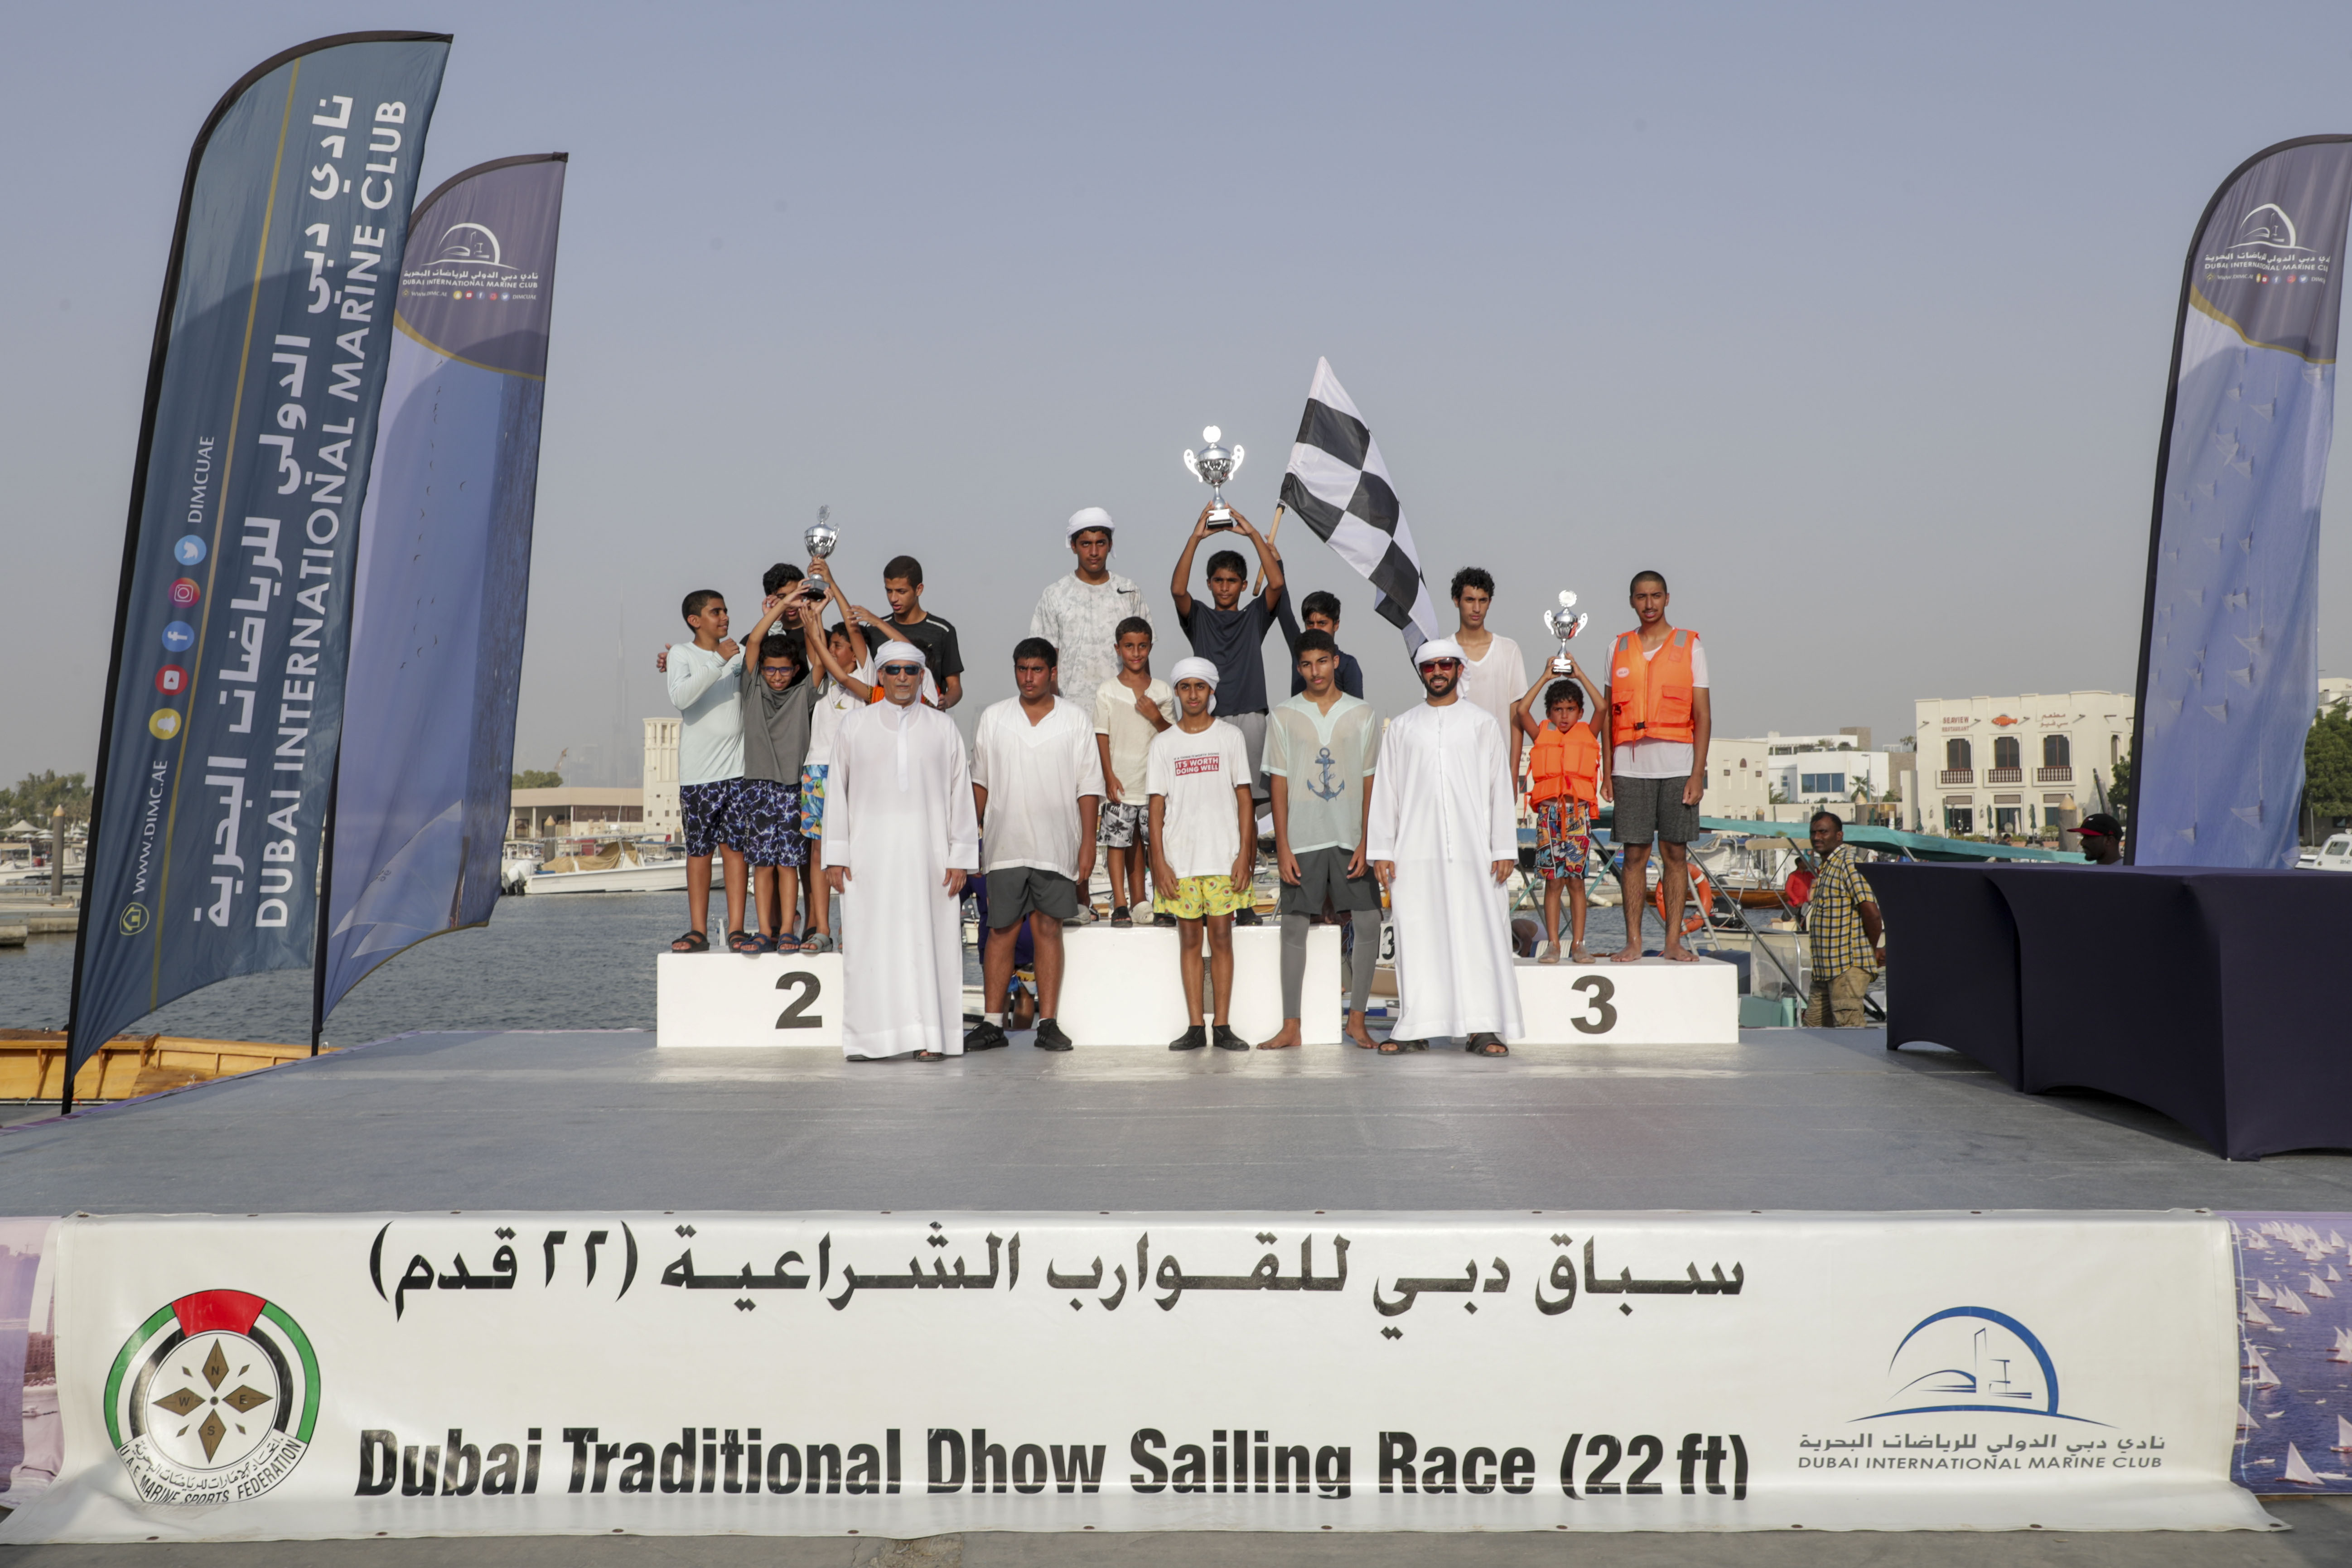 Theeb 40 Climbs to the Top for the First Round of the 22ft Dhow Race